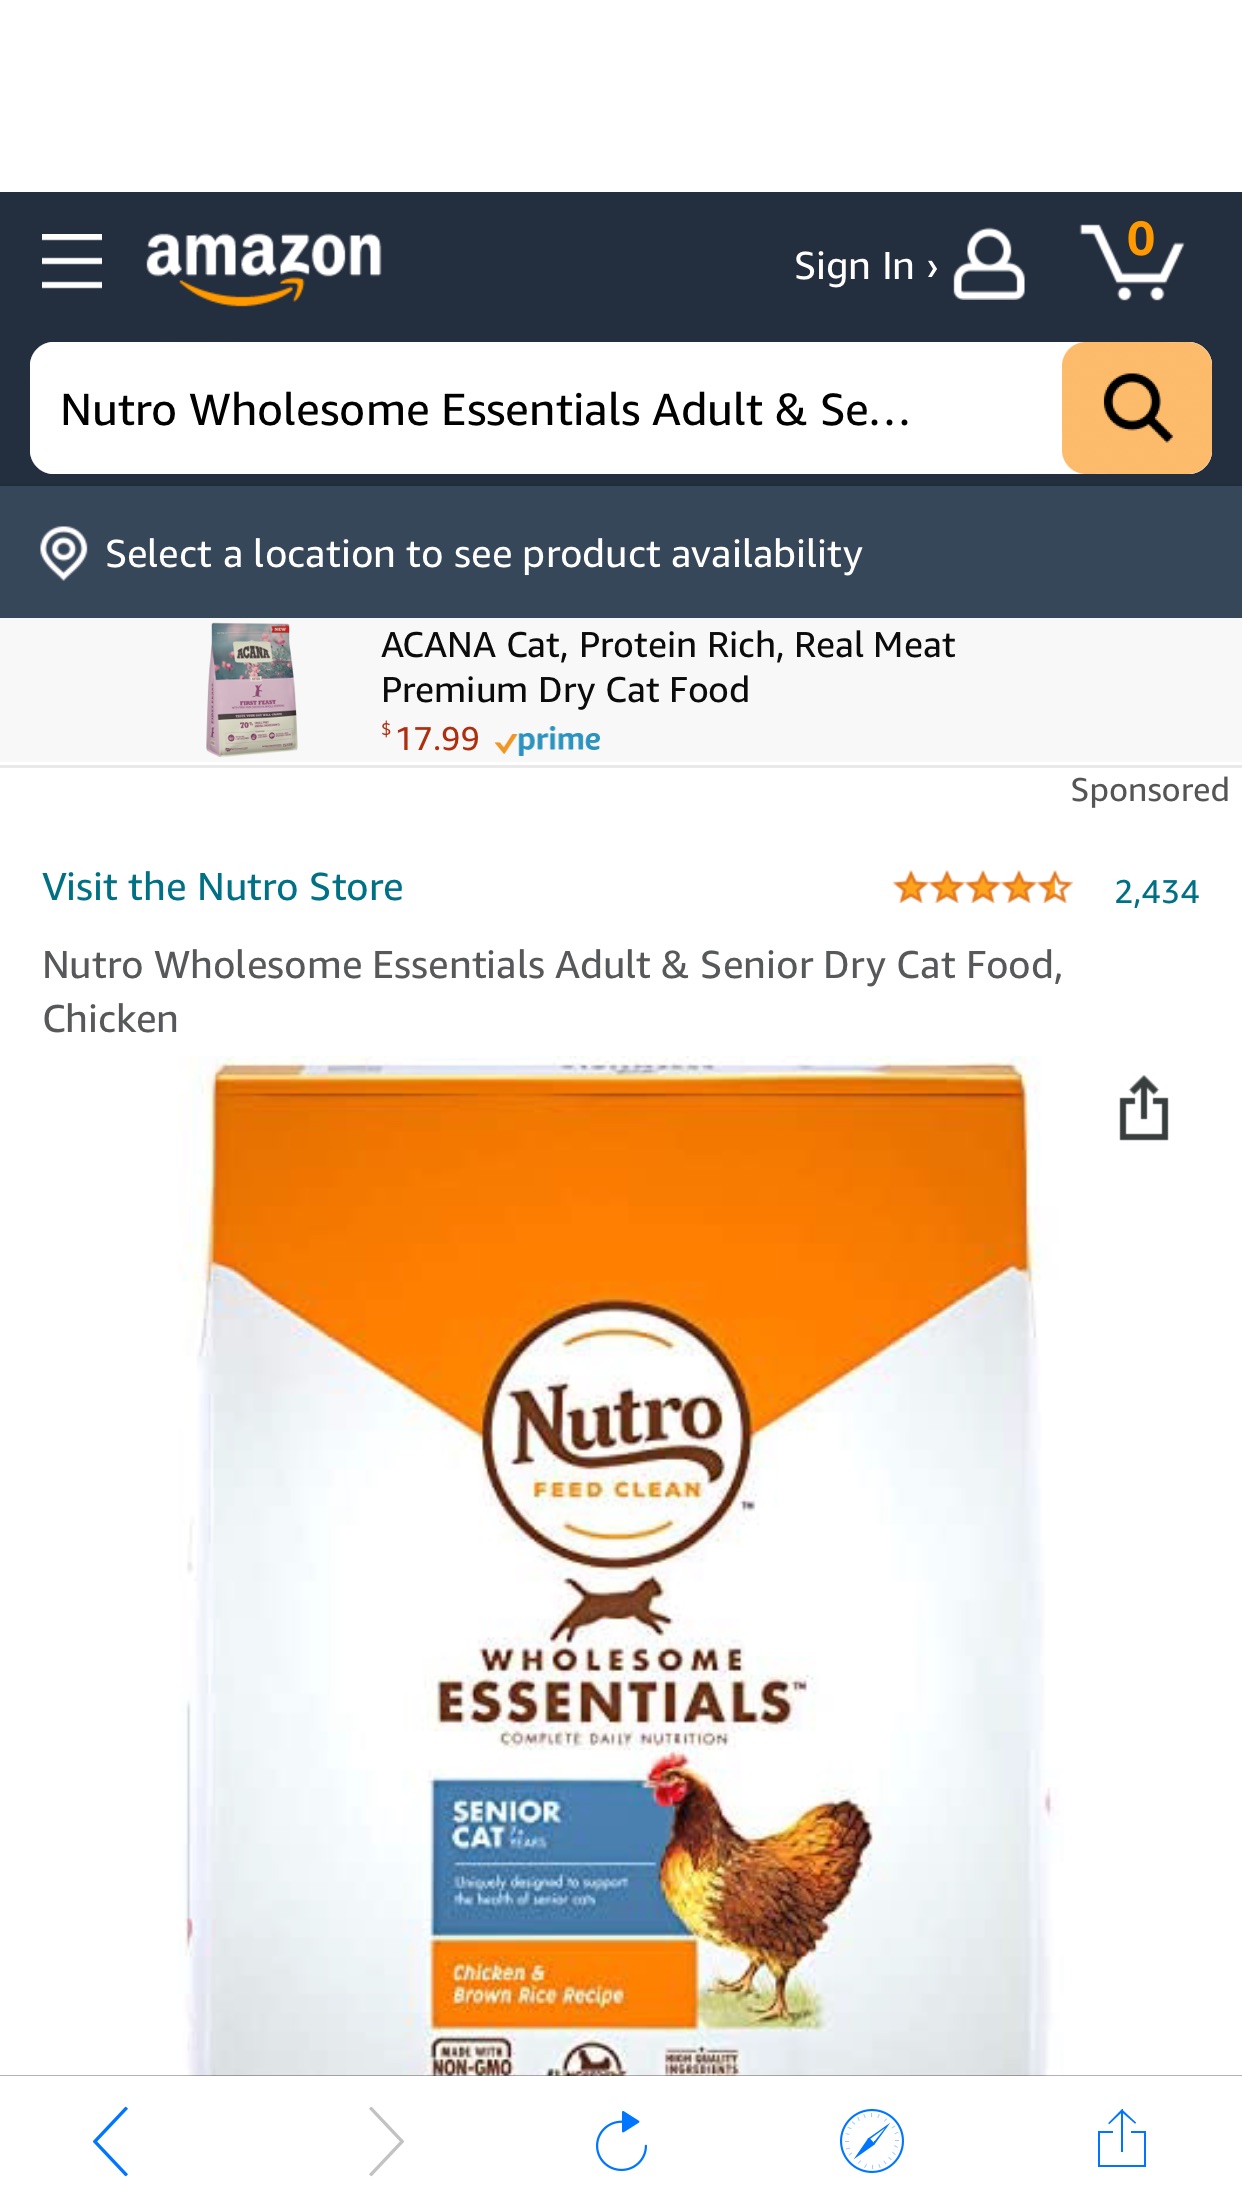 Amazon.com: NUTRO WHOLESOME ESSENTIALS Natural Dry Cat Food, Adult Cat Chicken & Brown Rice Recipe Cat Kibble, 14磅猫粮4.29刀